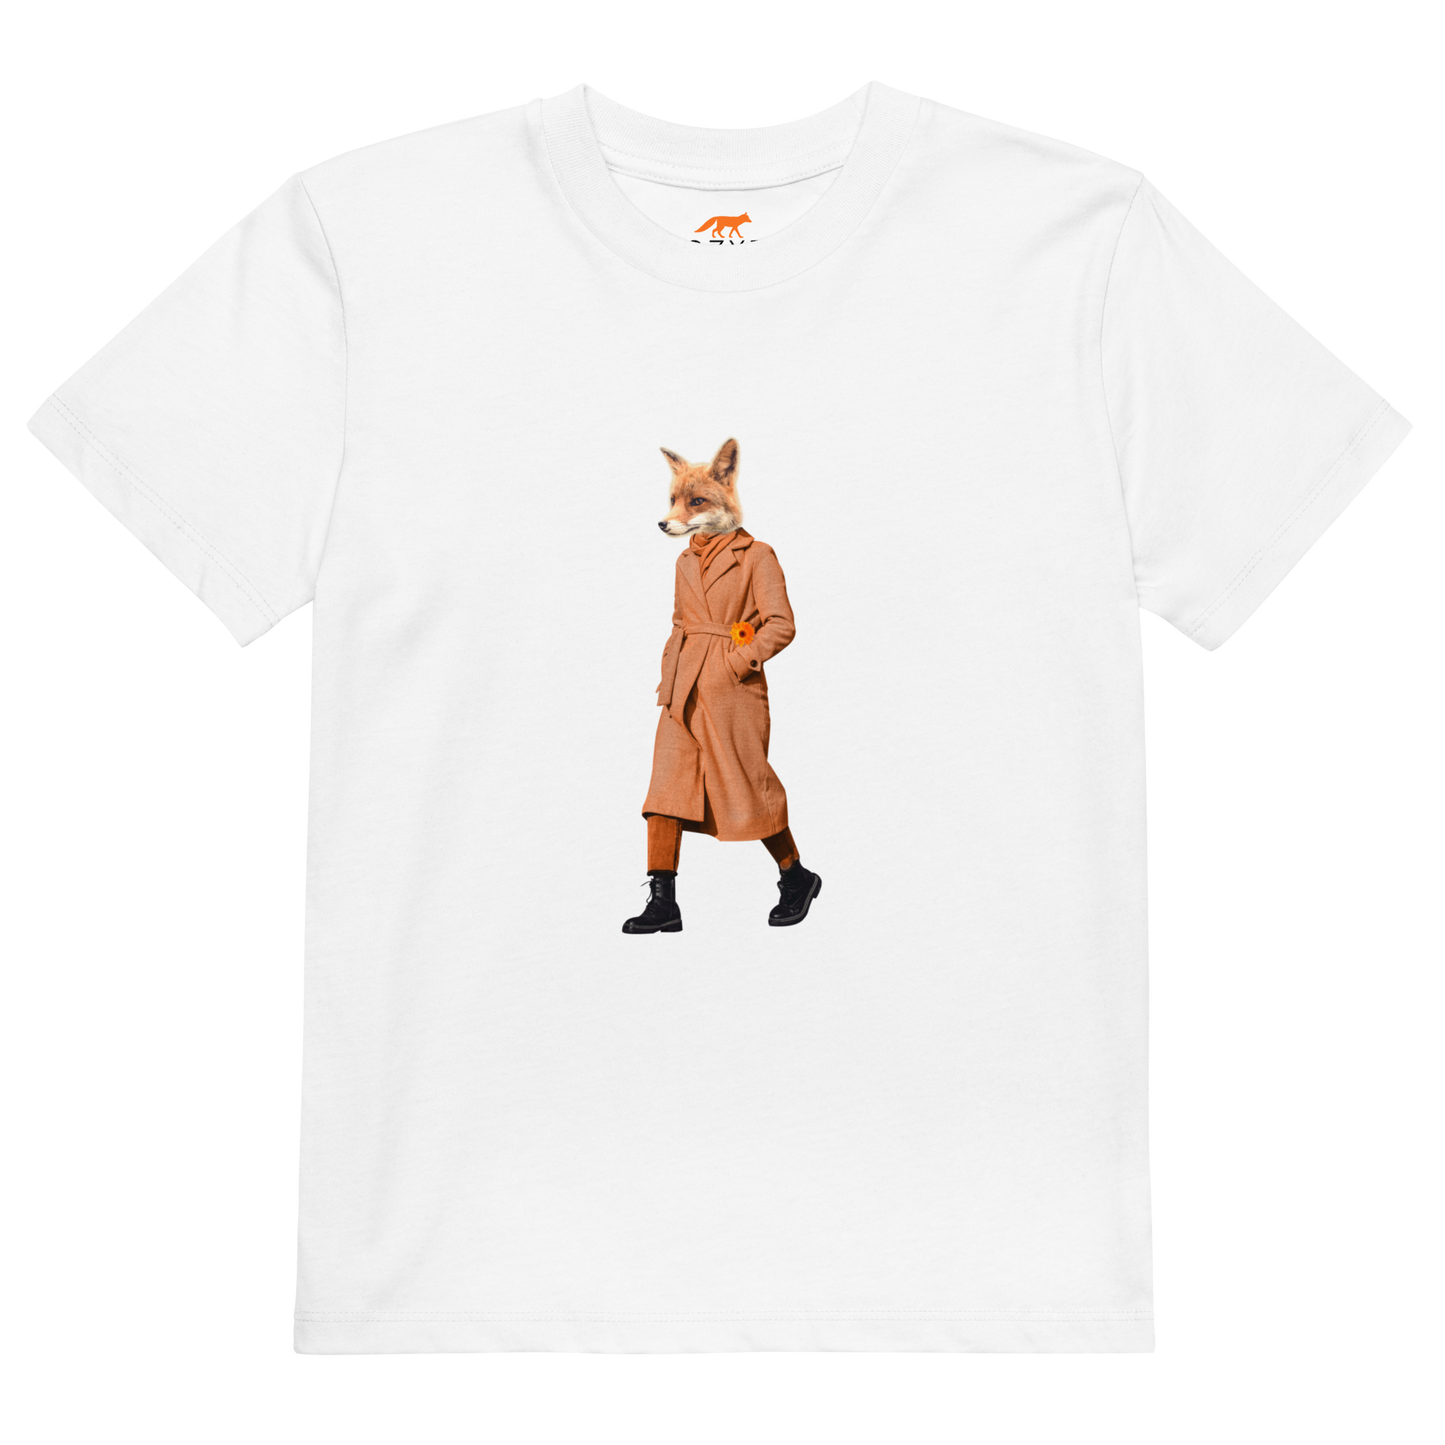 White Anthropomorphic Fox Organic Cotton Kids T-Shirt featuring an Anthropomorphic Fox In a Trench Coat graphic on the chest - Kids' Graphic Tees - Funny Animal T-Shirts - Boozy Fox